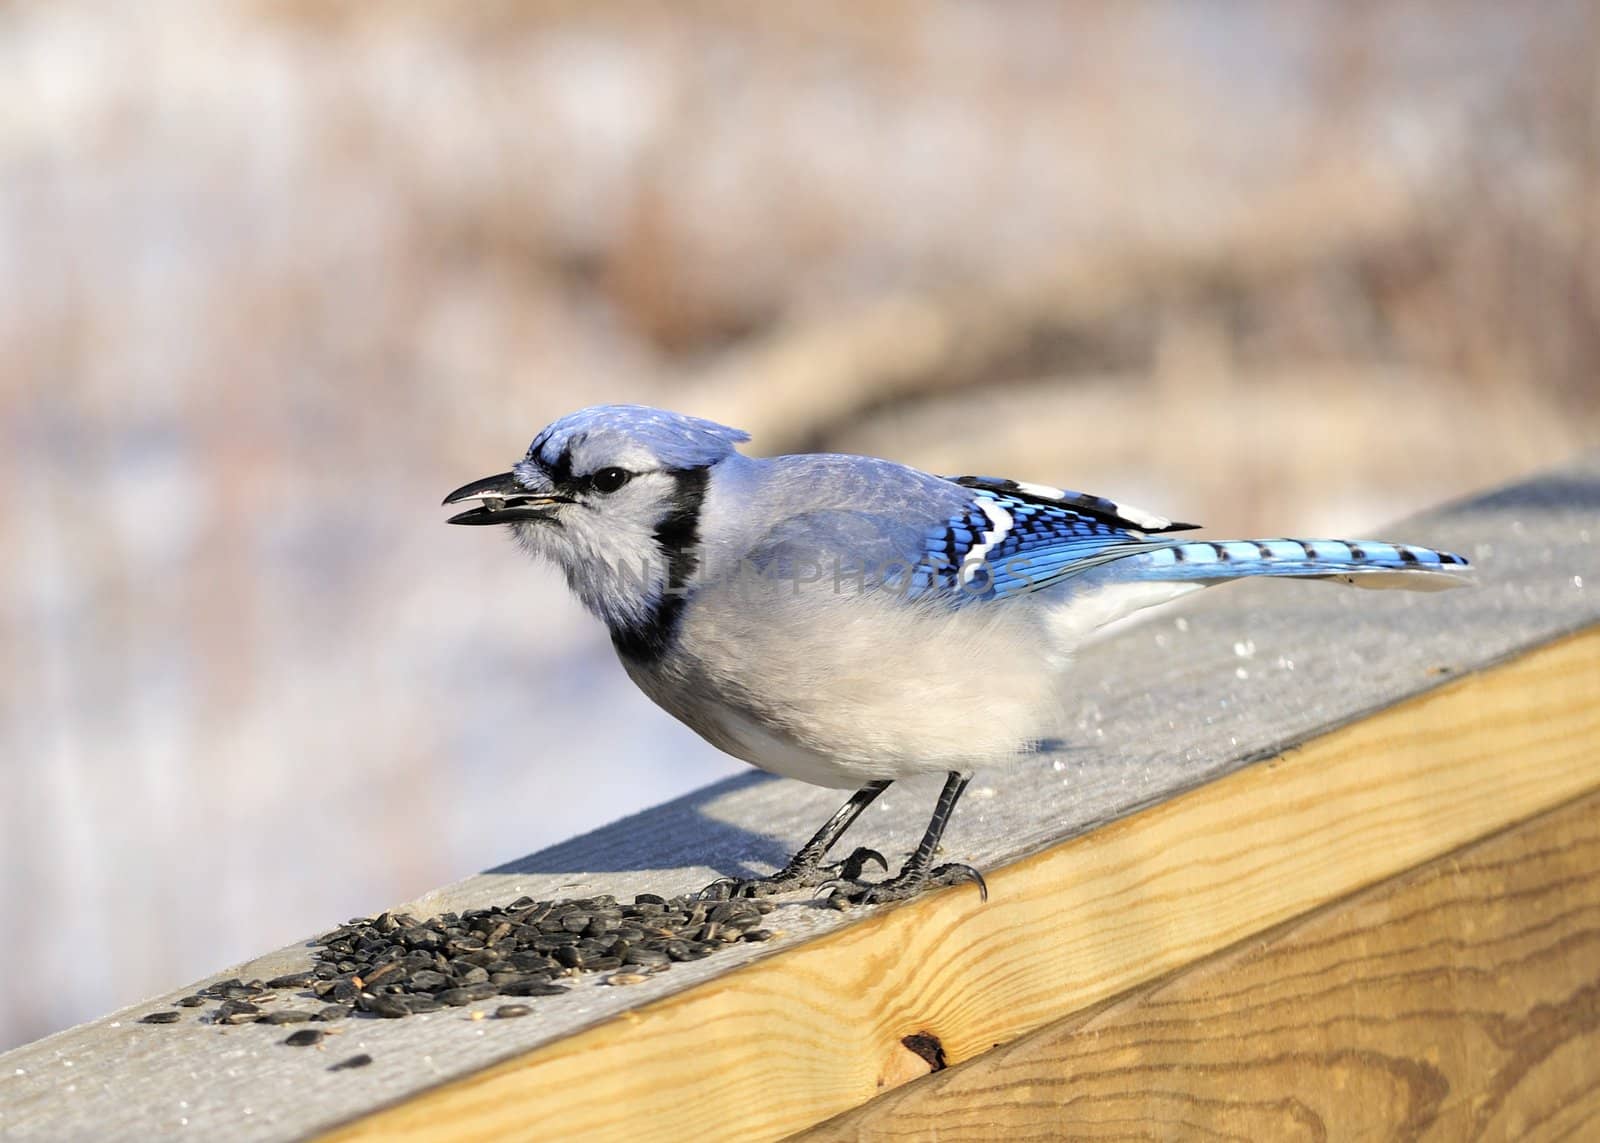 A blue jay perched on a wooden rail with bird seed.